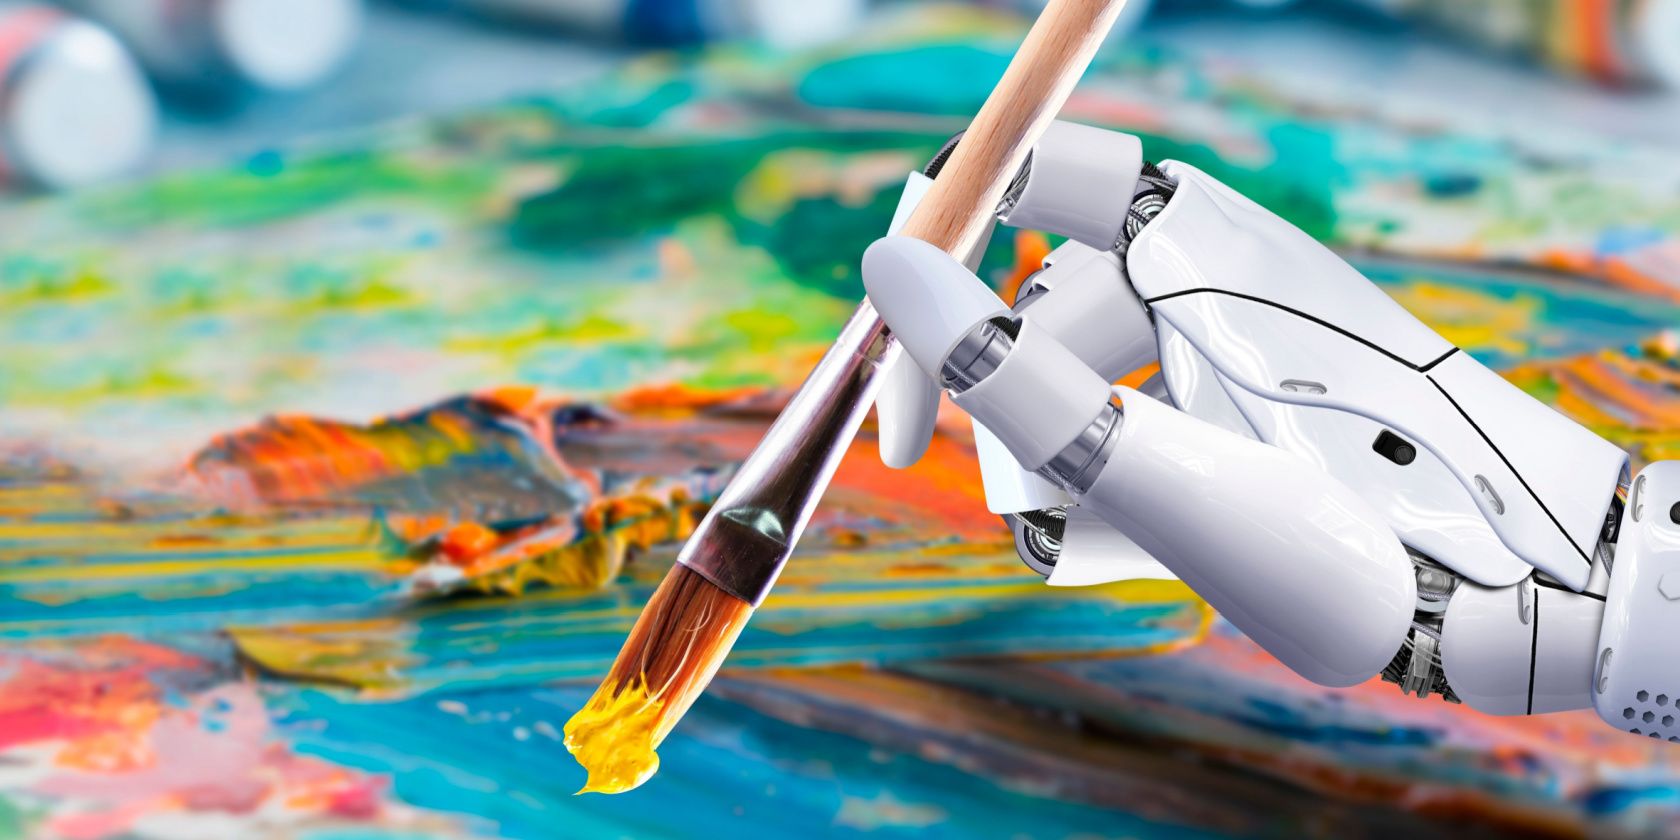 Robot Hand Holding Paintbrush Over Colorful Canvas